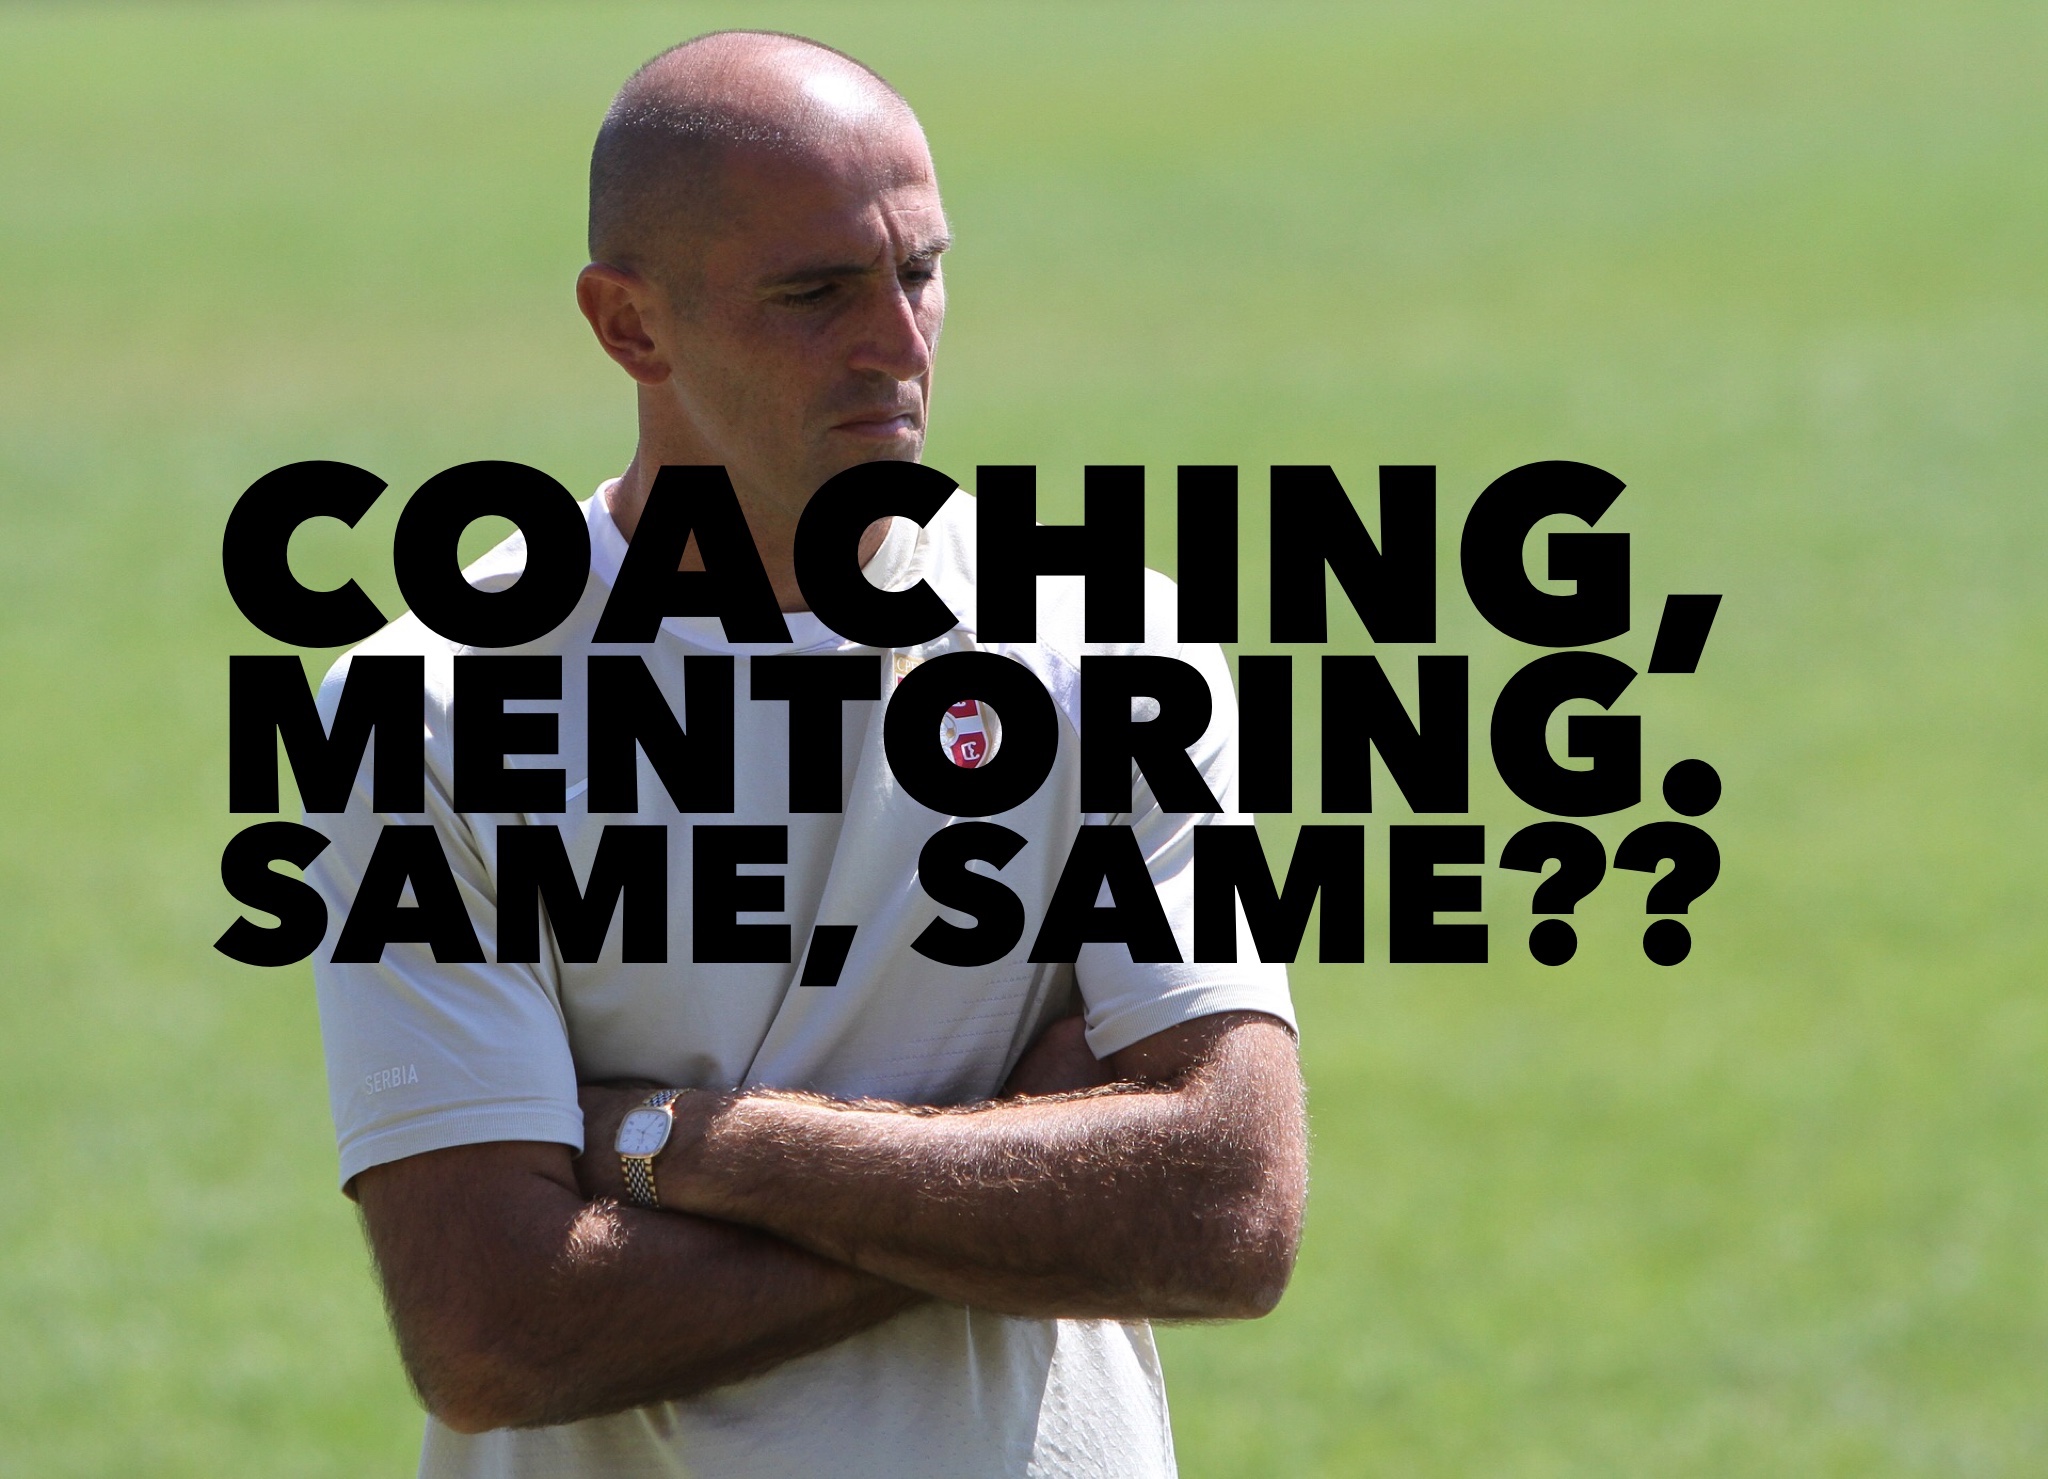 Coaching vs mentoring - are they the same?